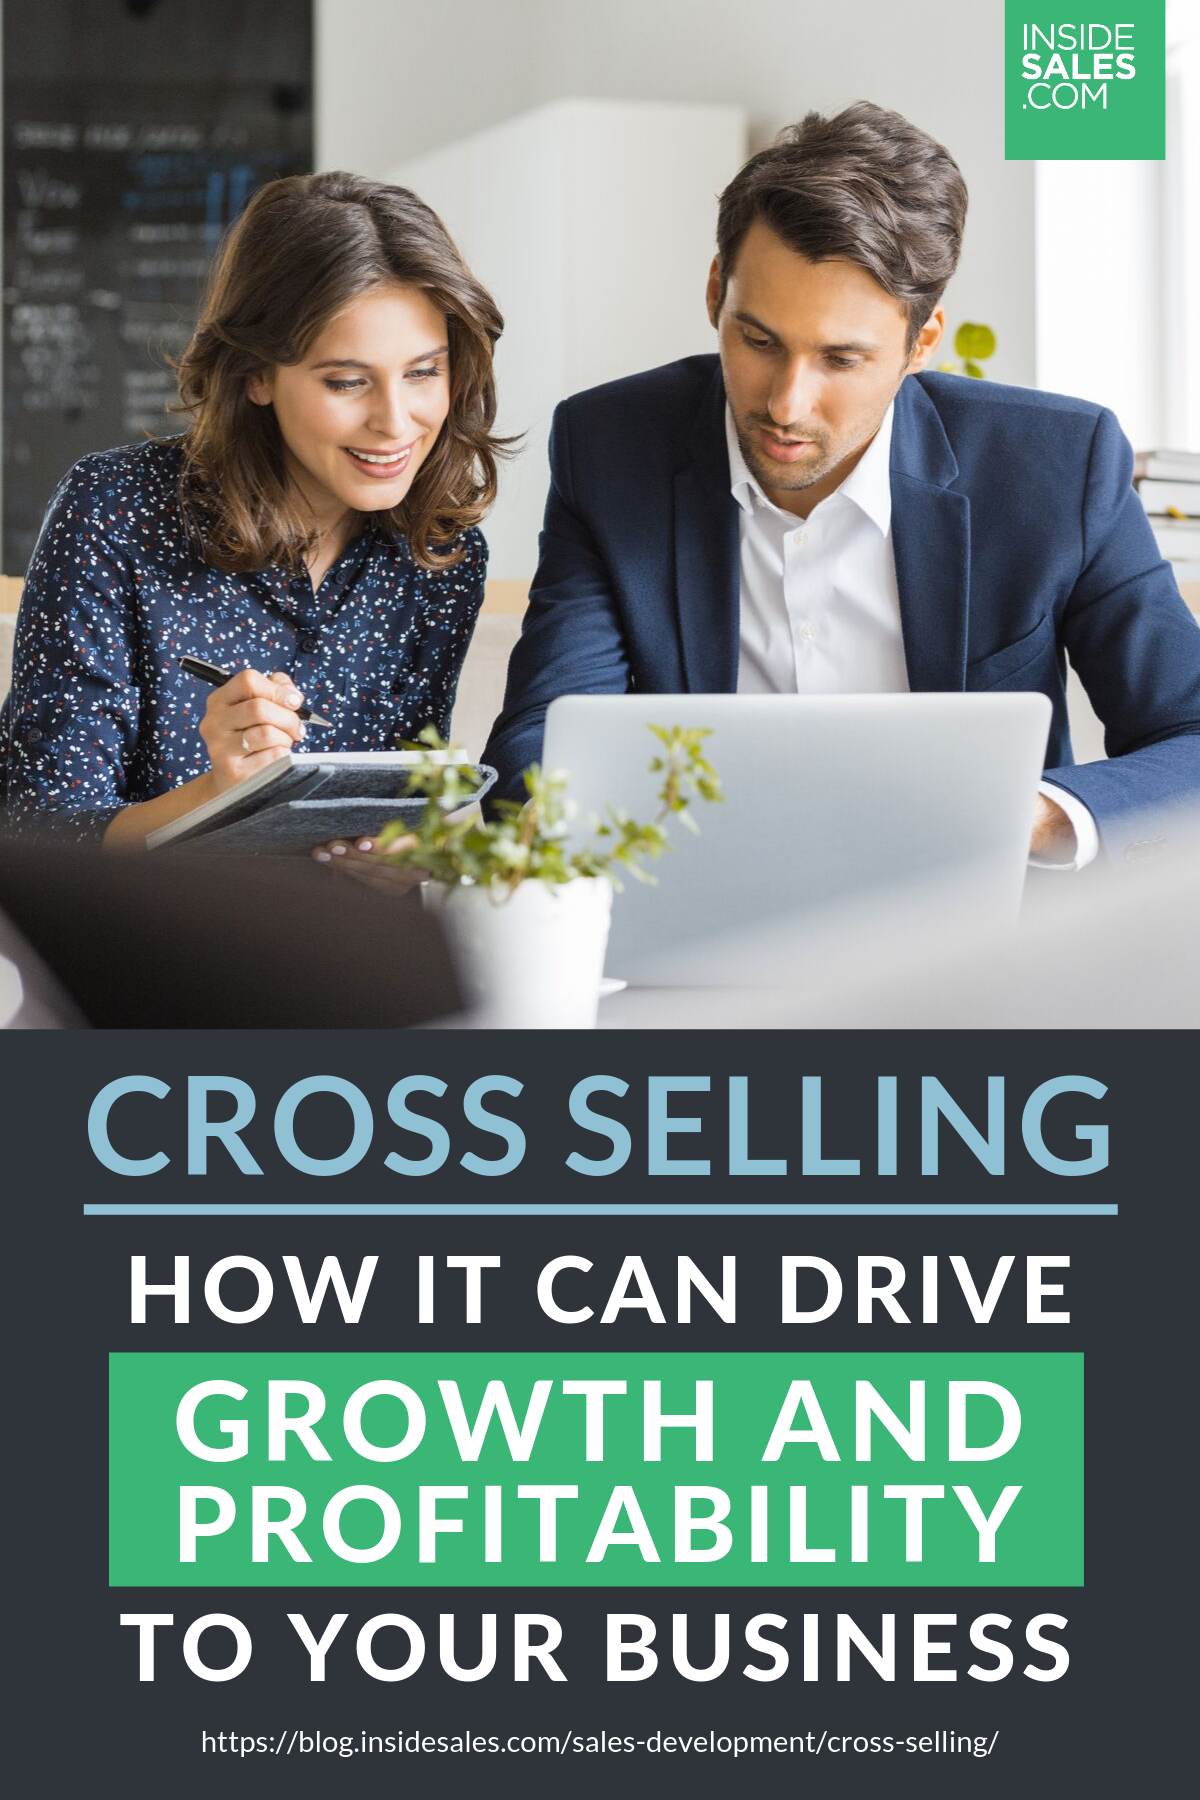 Cross Selling And How It Can Drive Growth And Profitability To Your Business https://www.insidesales.com/blog/sales-development/cross-selling/